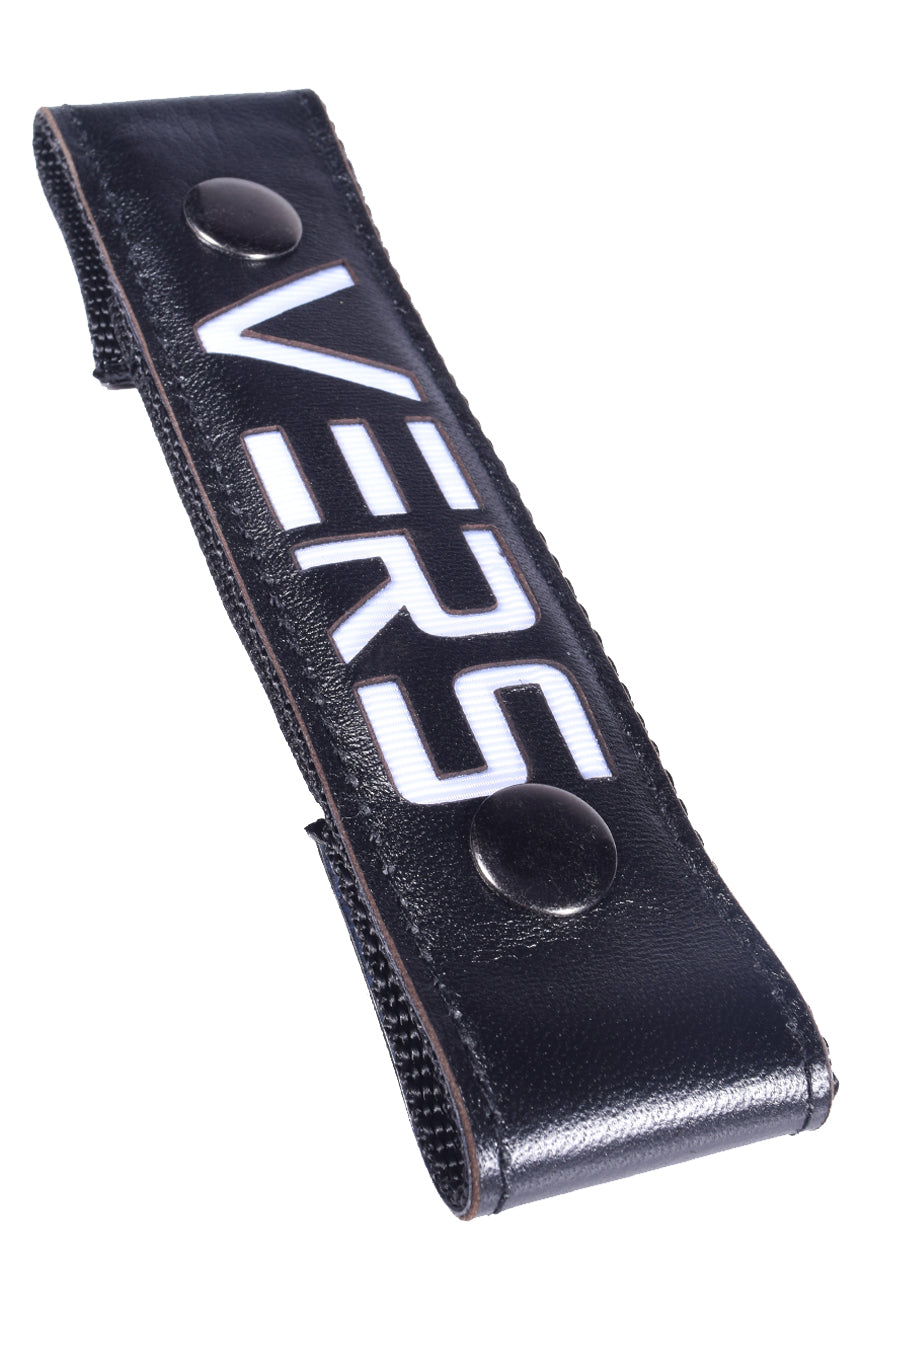 GLOW CENTER STRAP- VERS - DealByEthan.gay